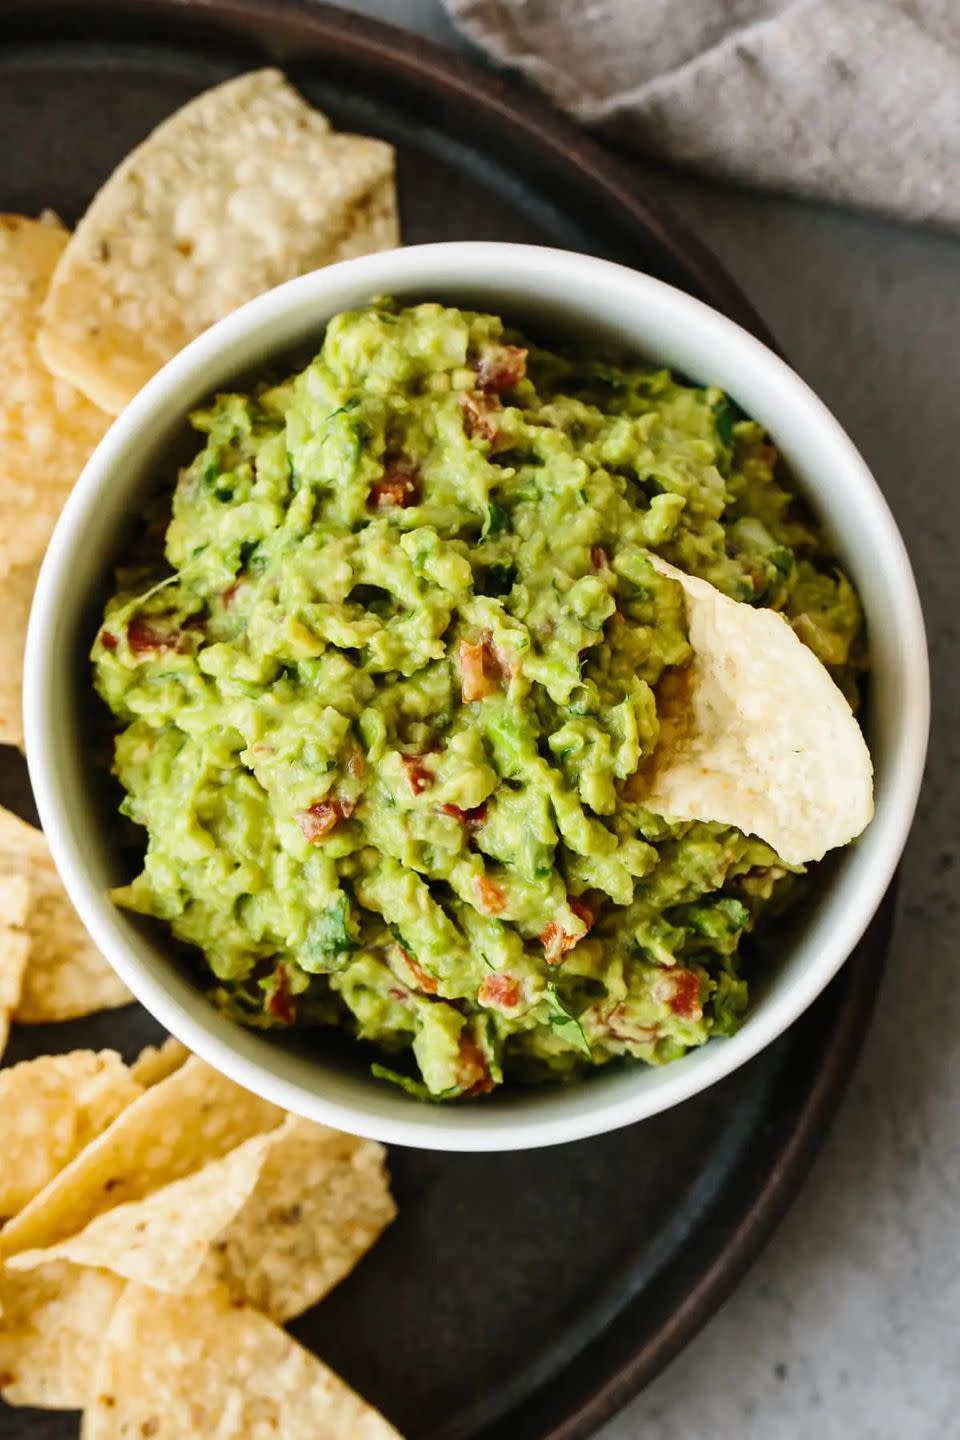 making guacamole sauce, mexican cuisine ingredients